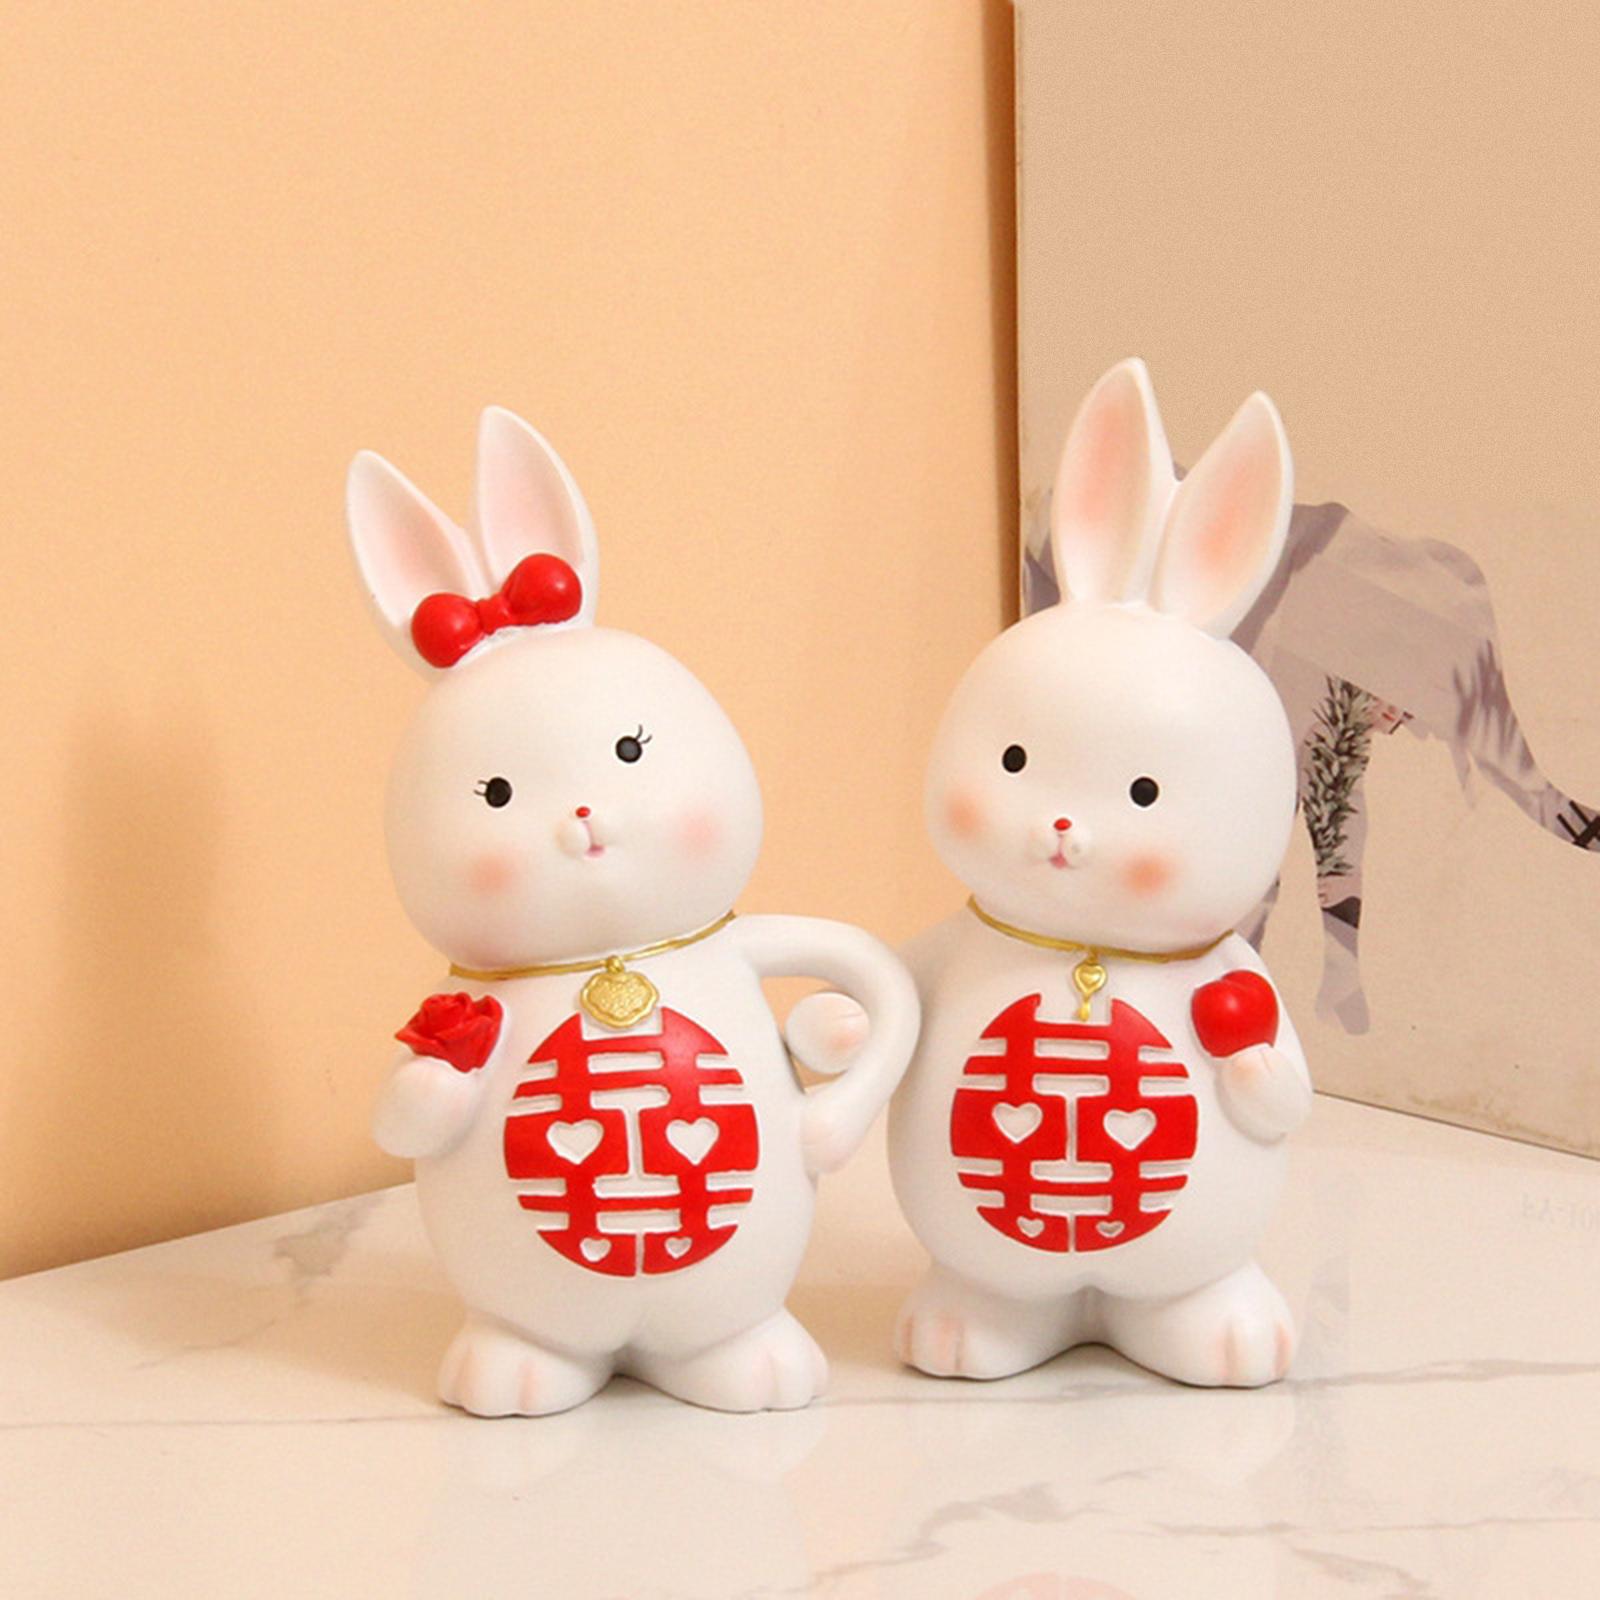 2Pcs Rabbits Statues Resin Decorative Couple Figurines for Christmas Wedding